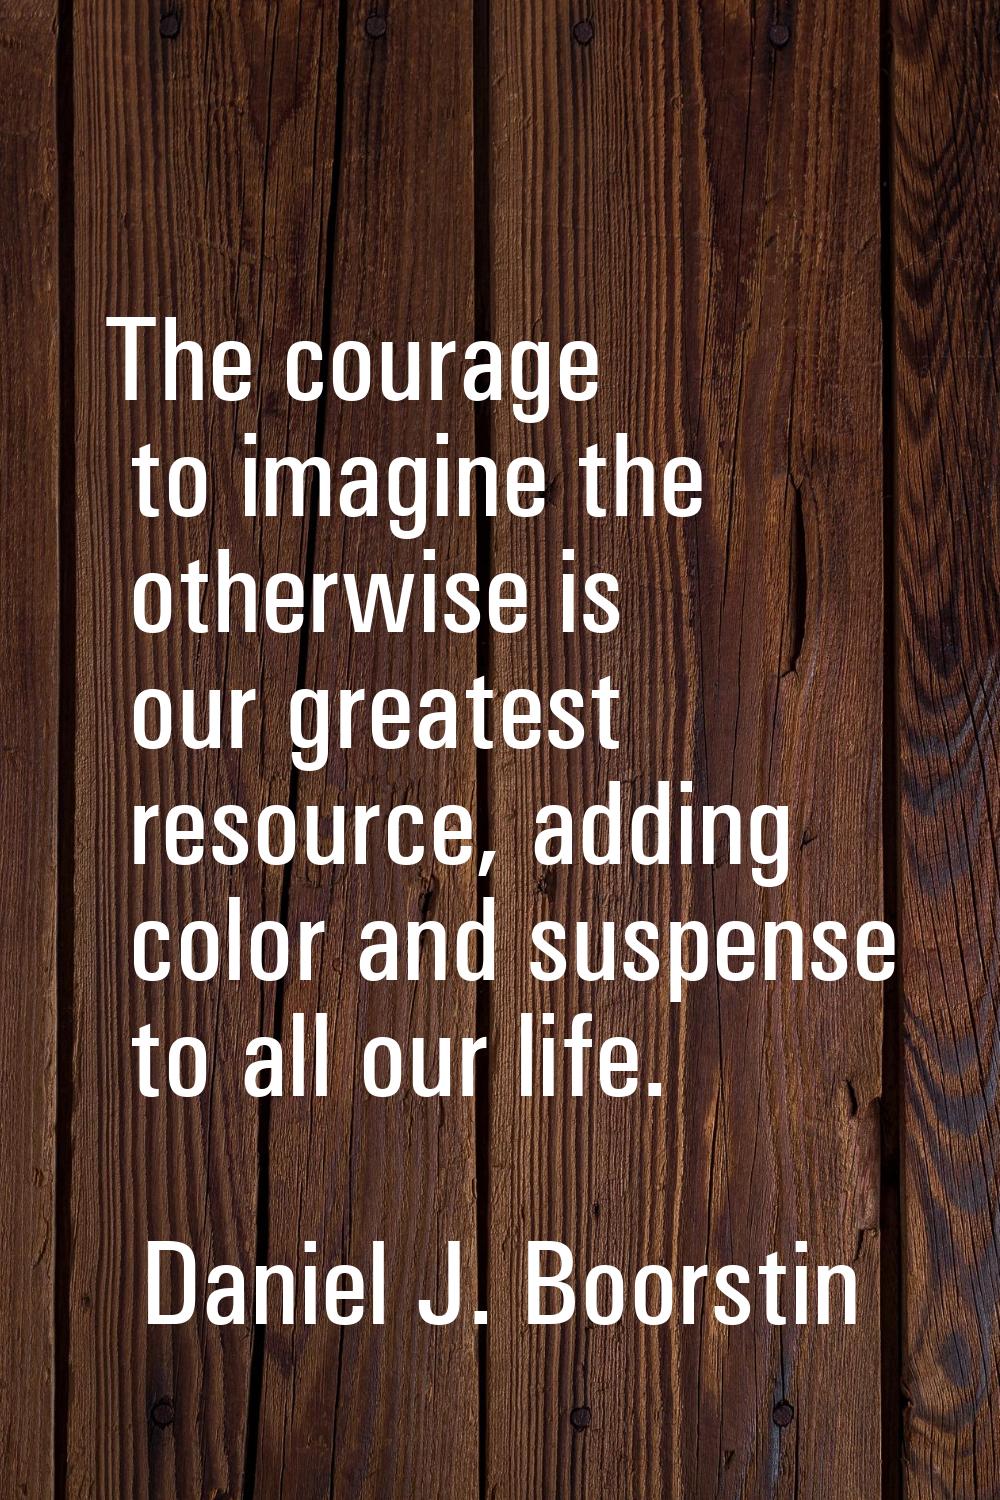 The courage to imagine the otherwise is our greatest resource, adding color and suspense to all our